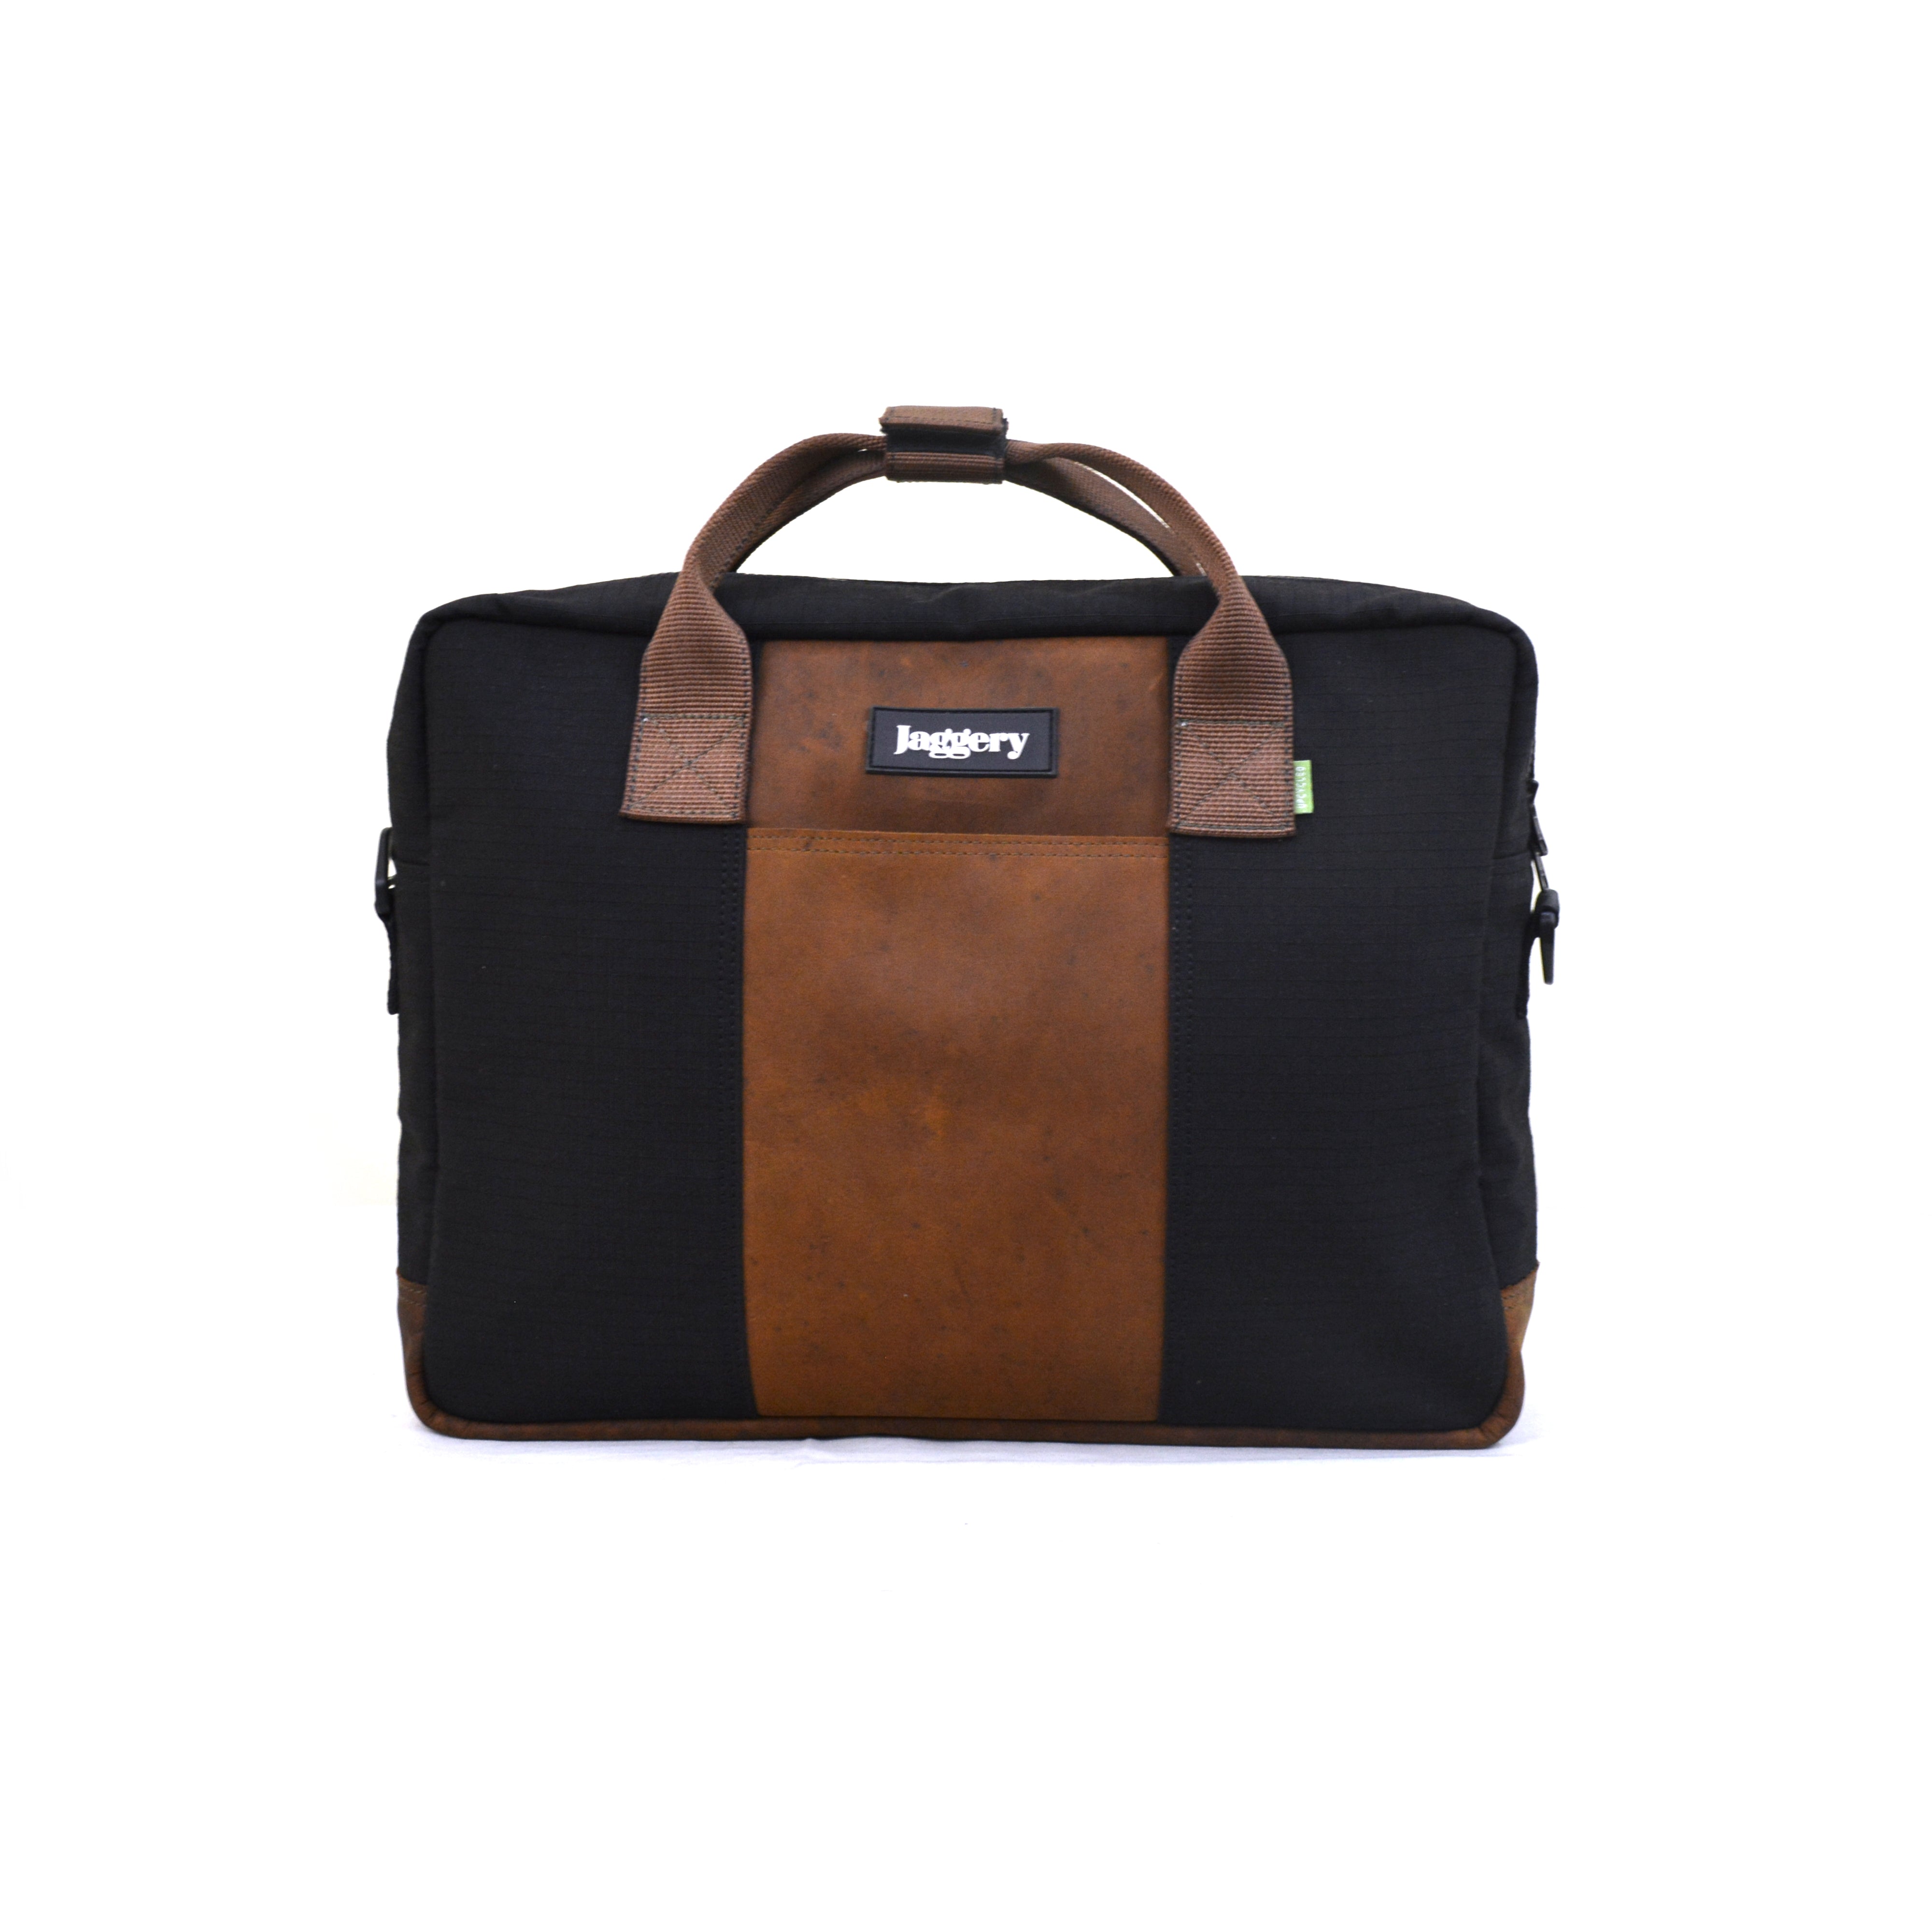 Black Cappuccino Co-founder's Bag in Black Canvas & Salvaged Nubuck [15" laptop bag]